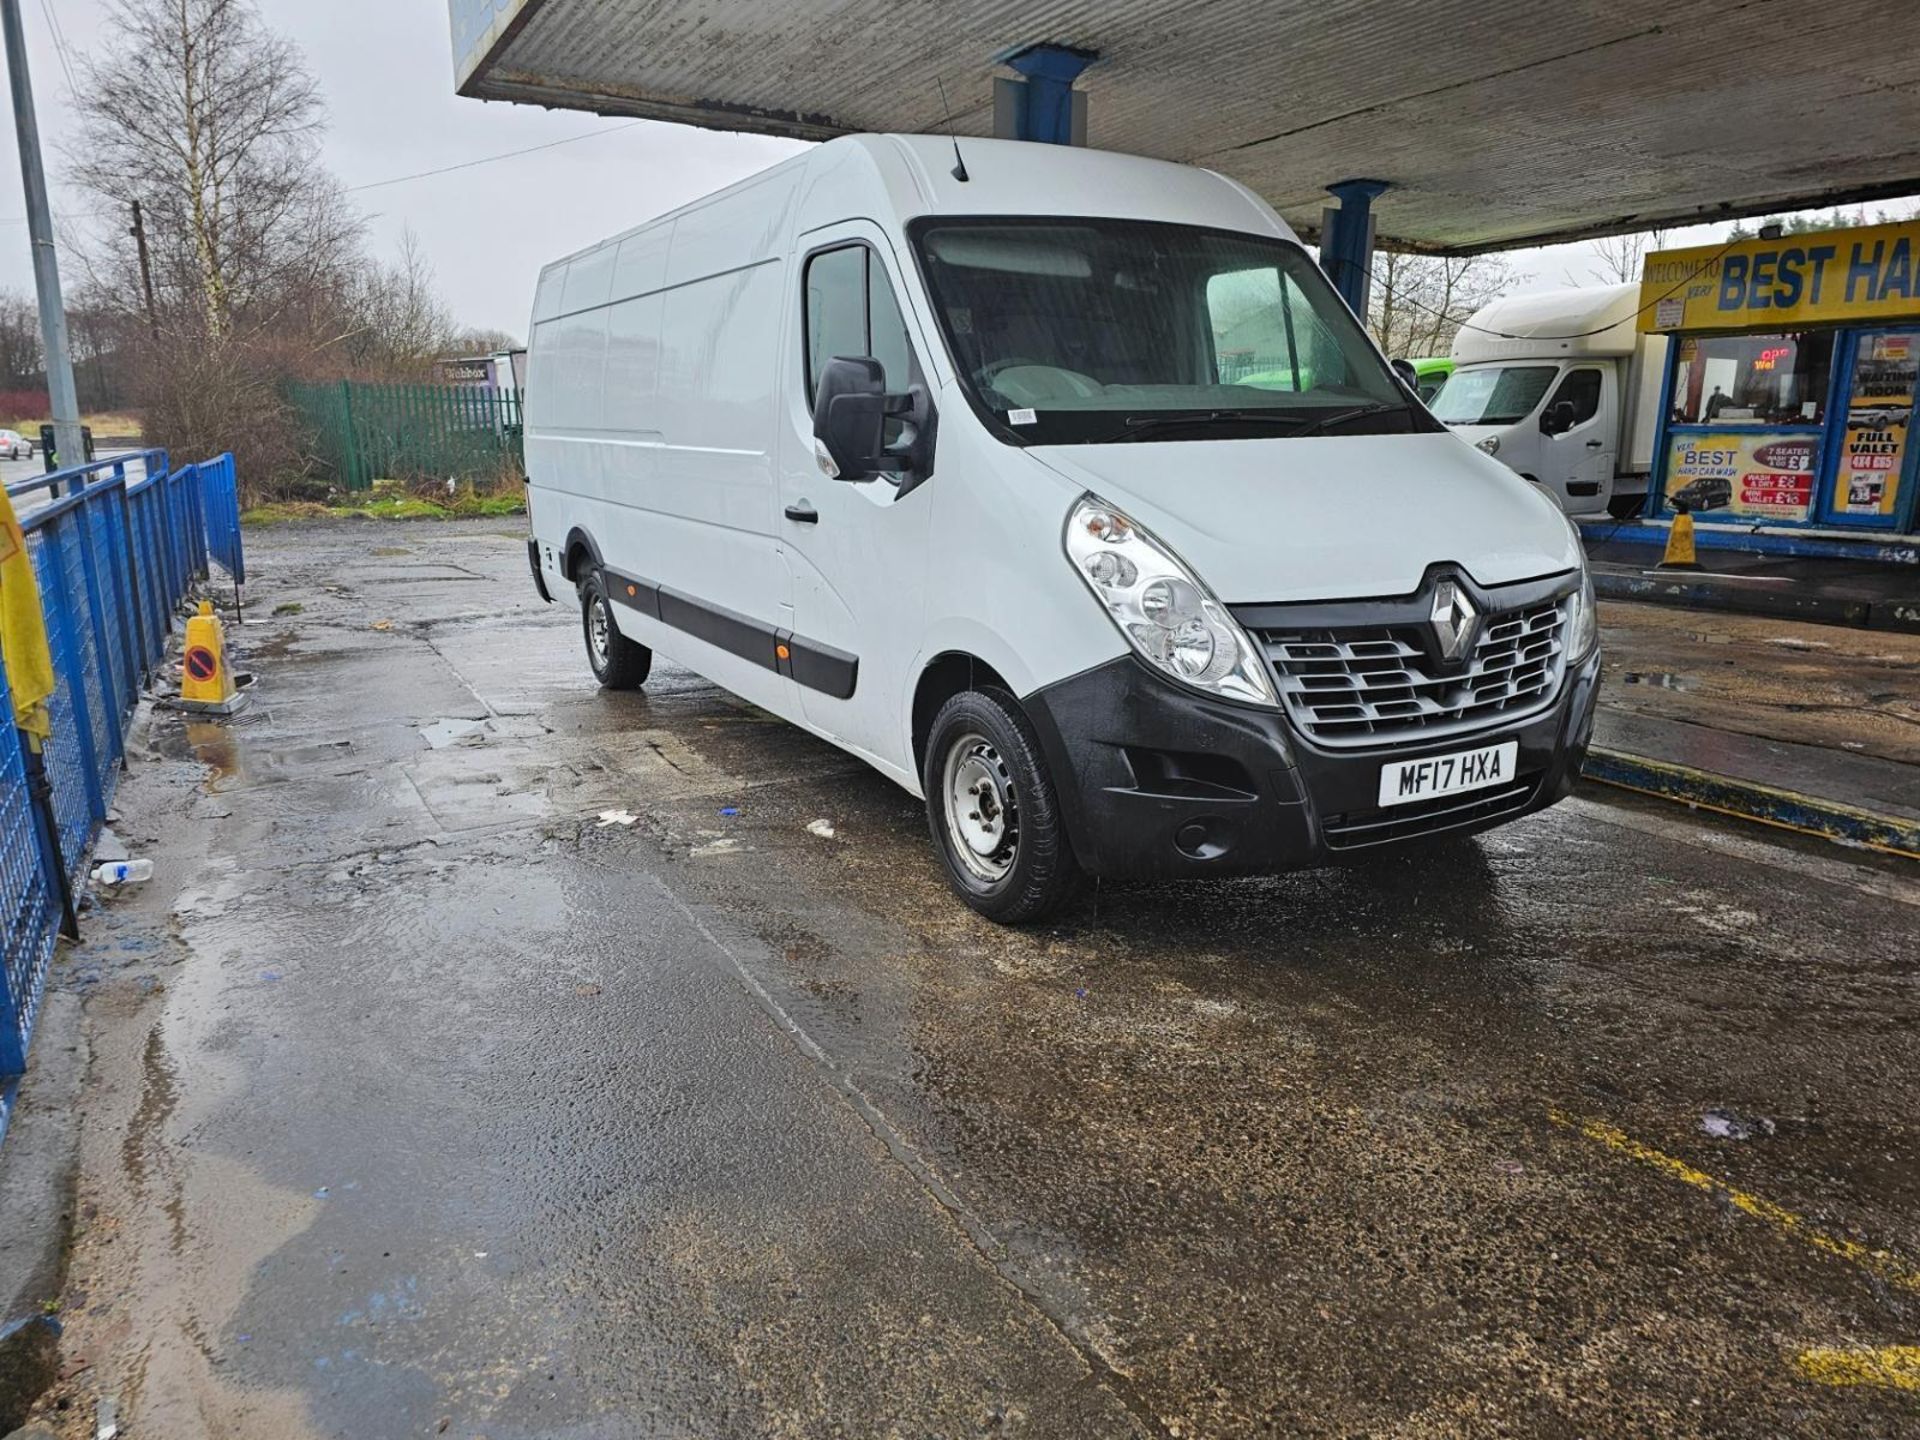 2017 RENAULT MASTER LML35 ENERGY DCI 145 BUSINESS EXTRA LONG WHEEL BASE HIGH ROOF